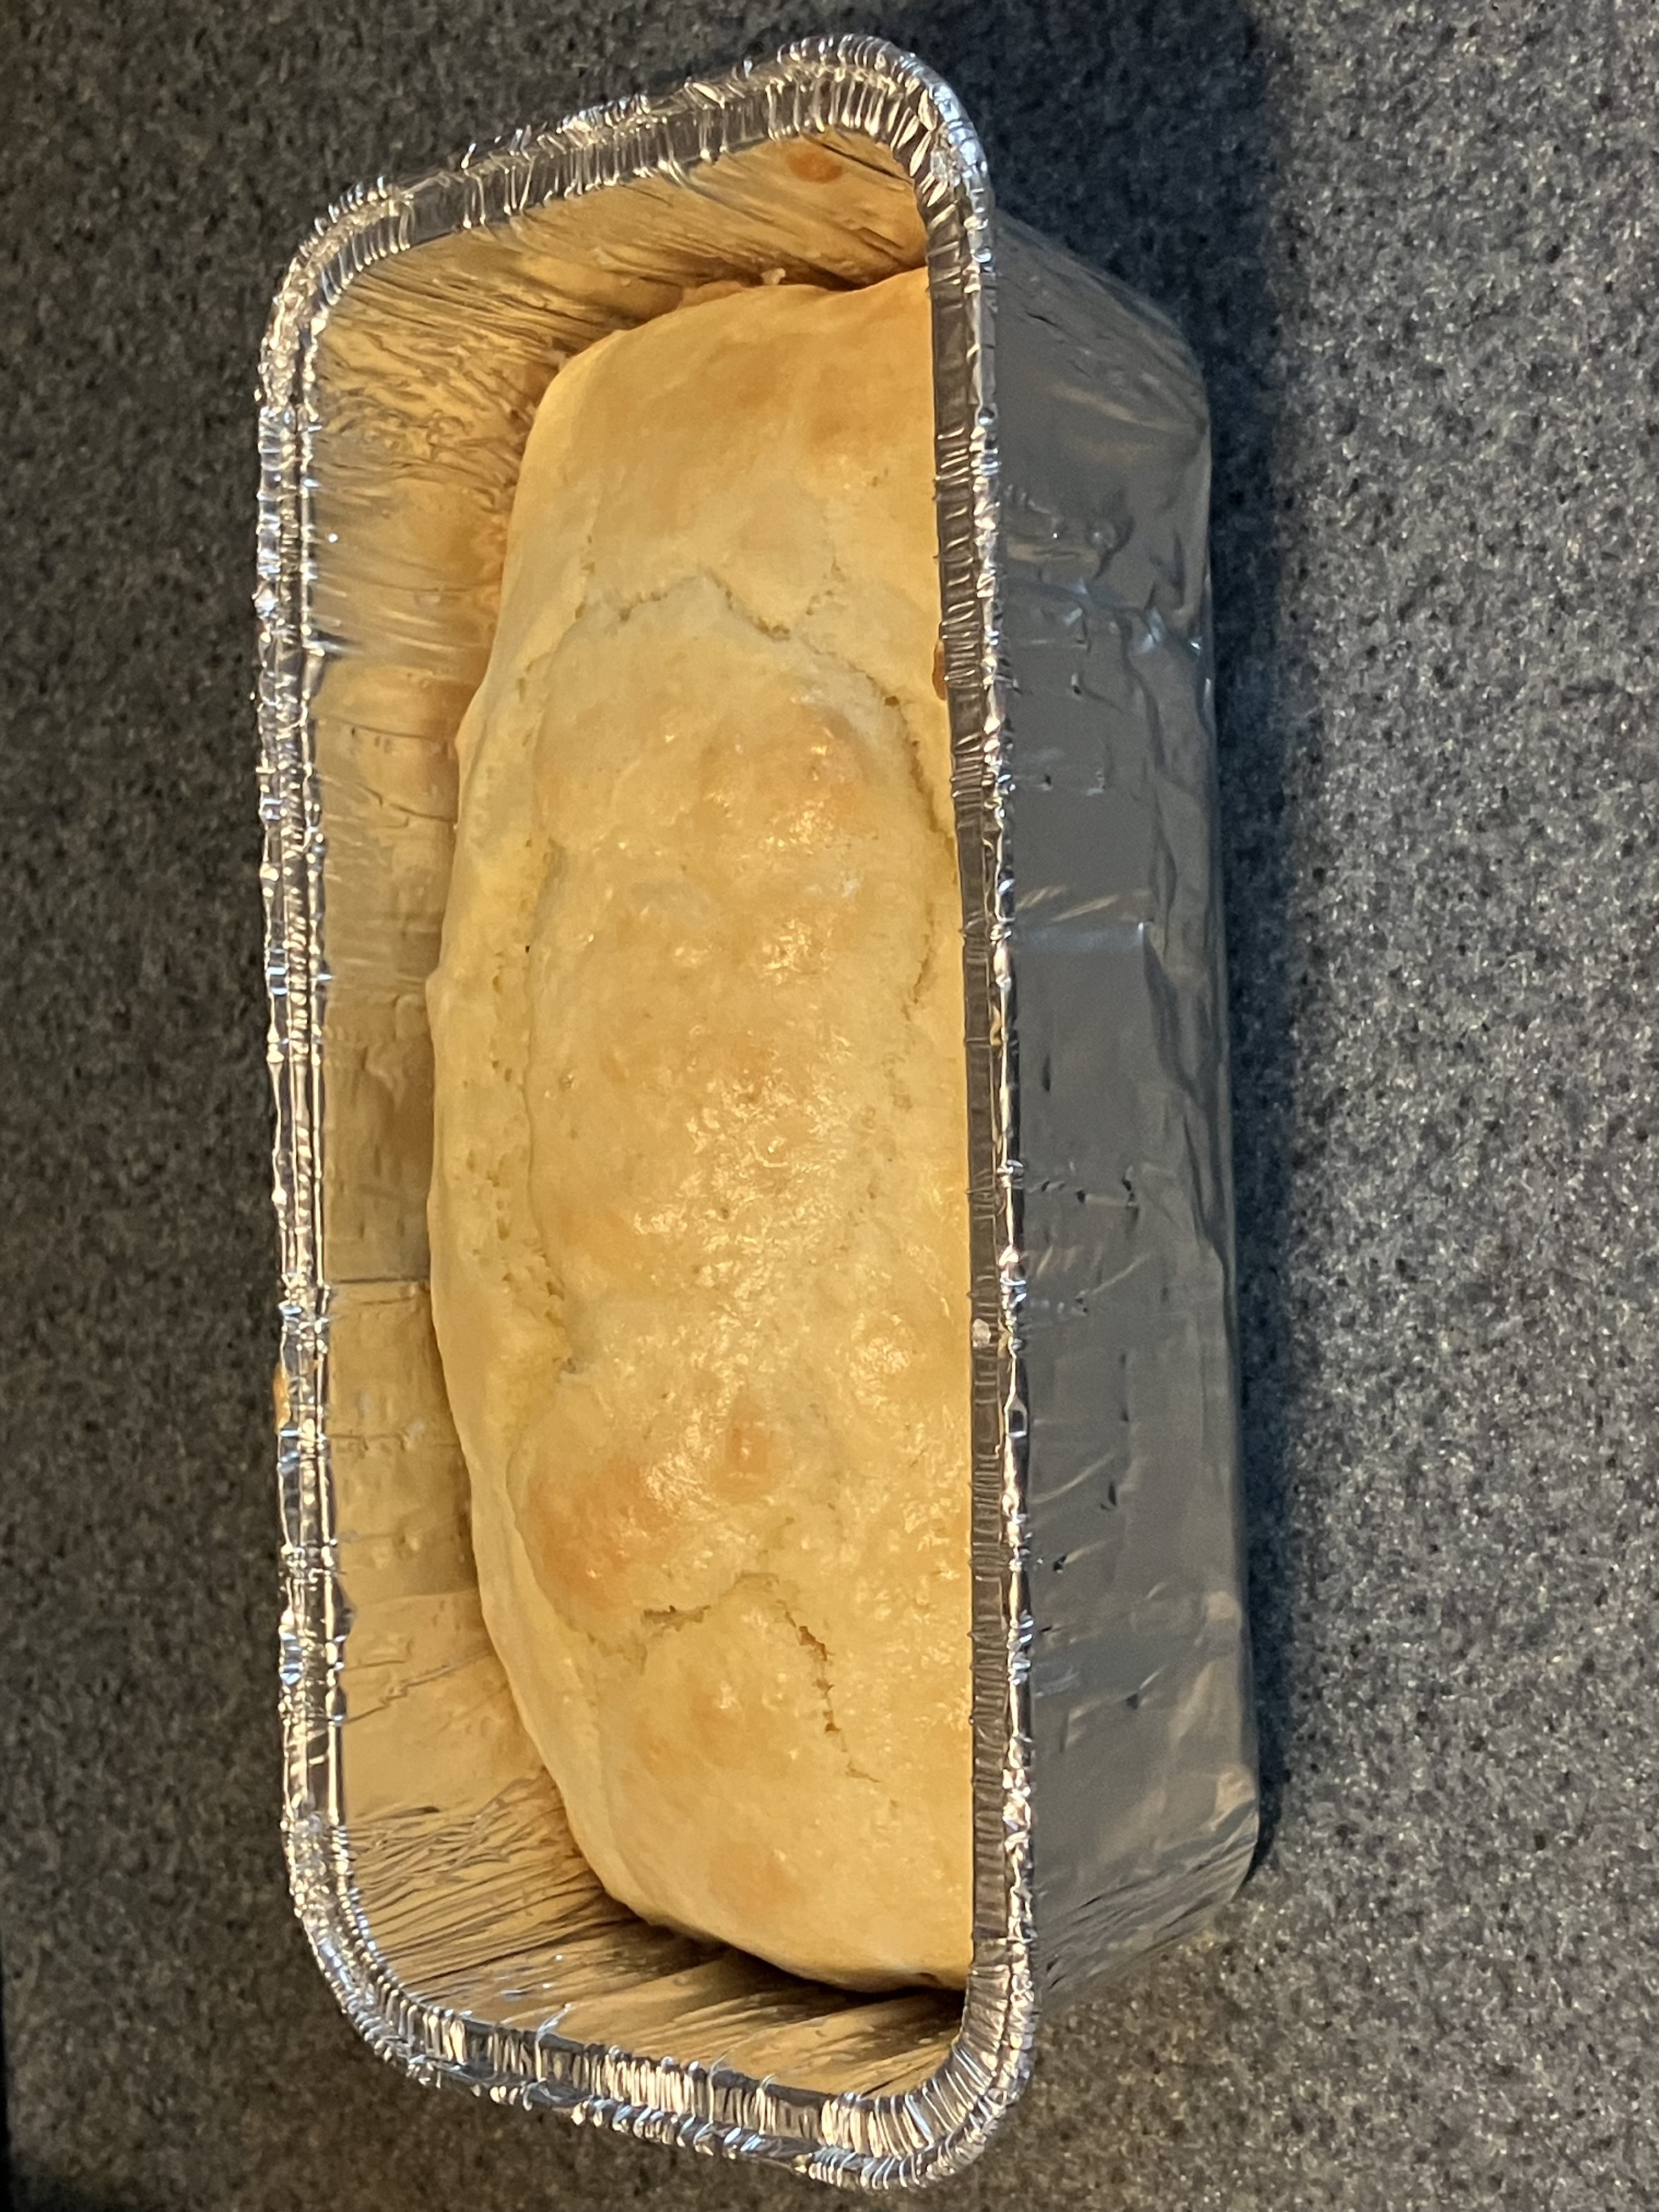 A baked loaf of cake in a metal pan.